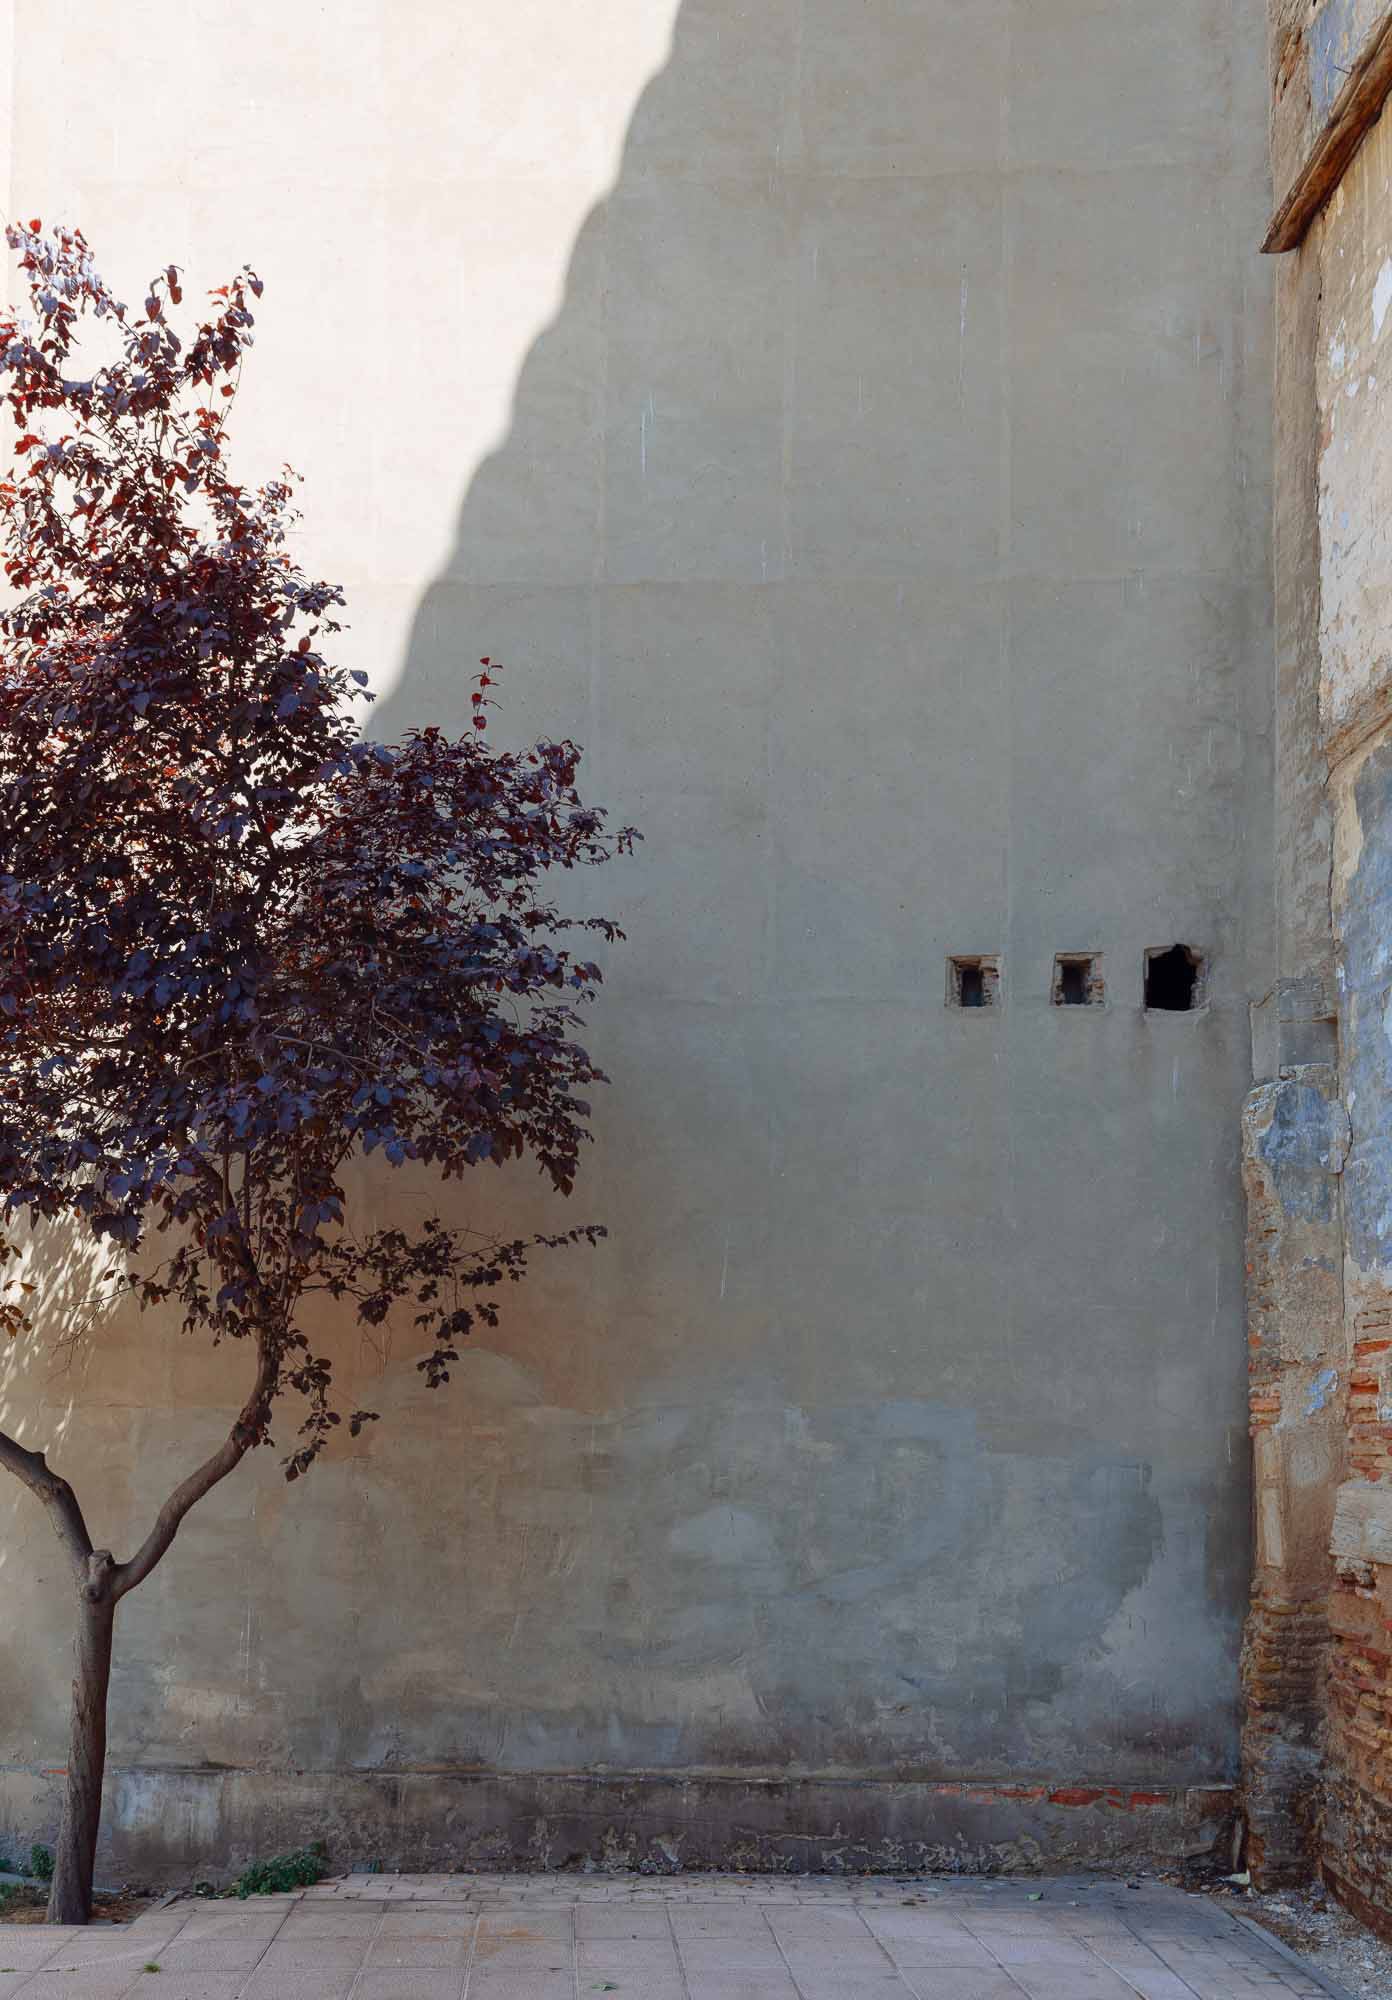 A single tree with autumn-colored leaves beside a large, plain wall with small openings, in Zaragoza, Spain.